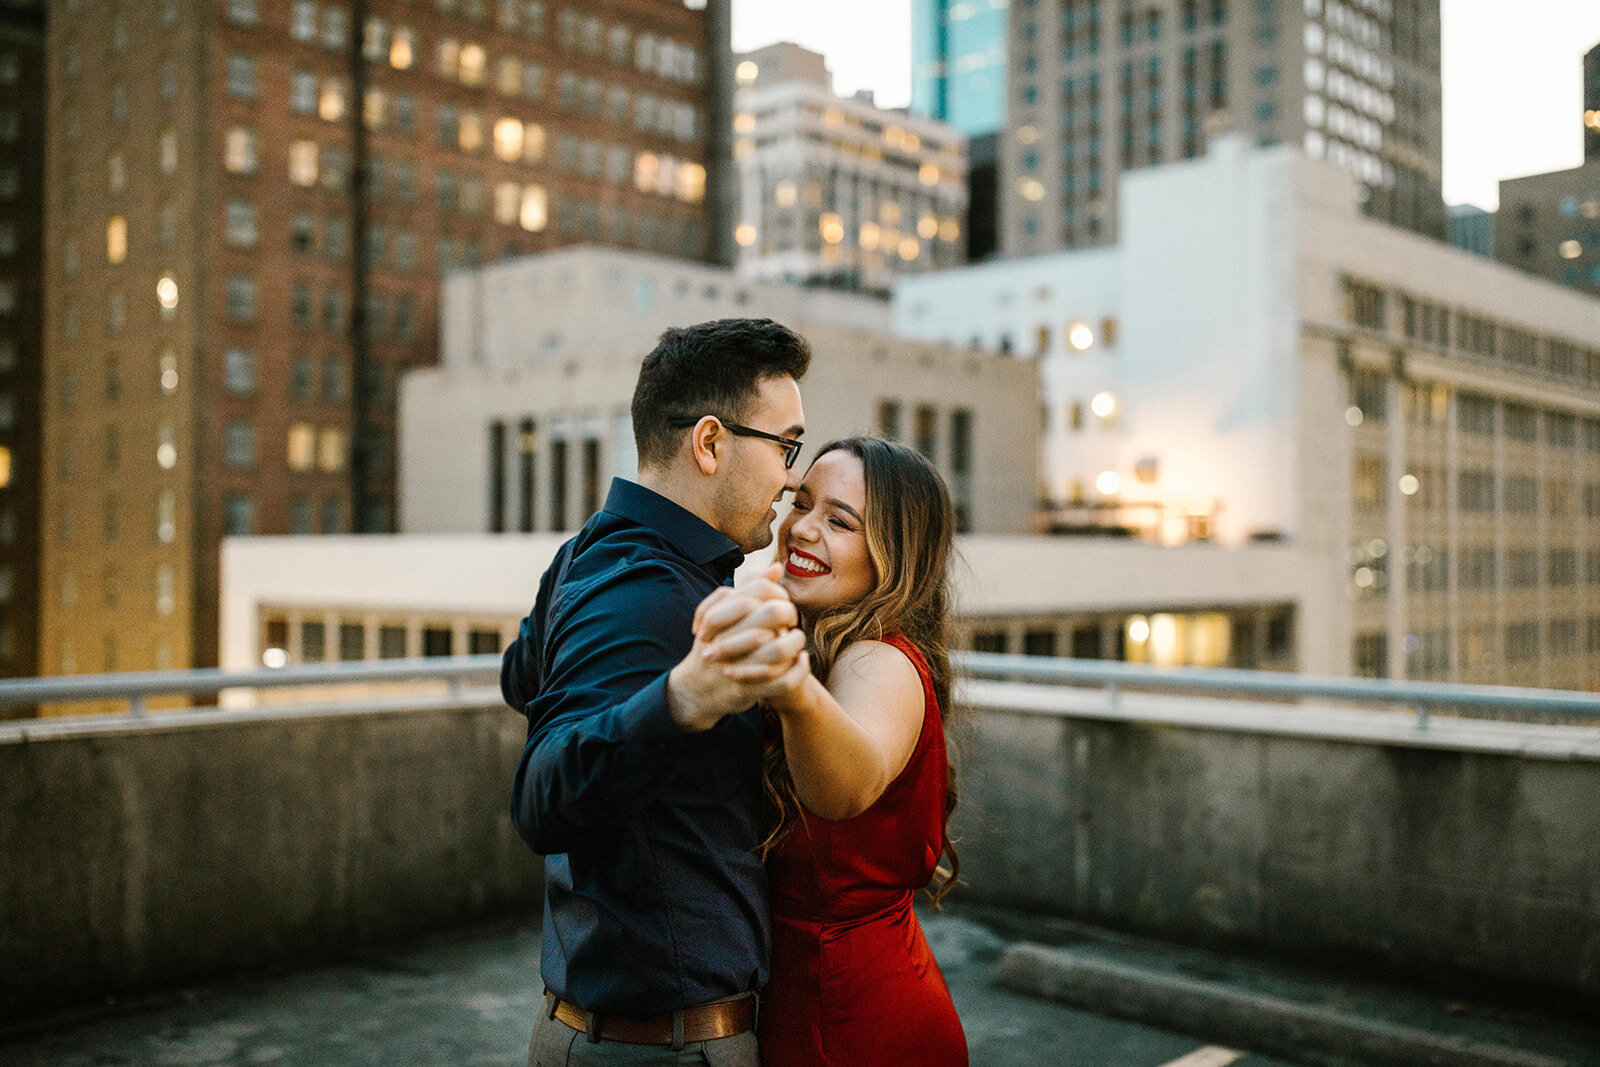 Kori+Tommy_Memorial Park and Downtown Houston Engagements_48